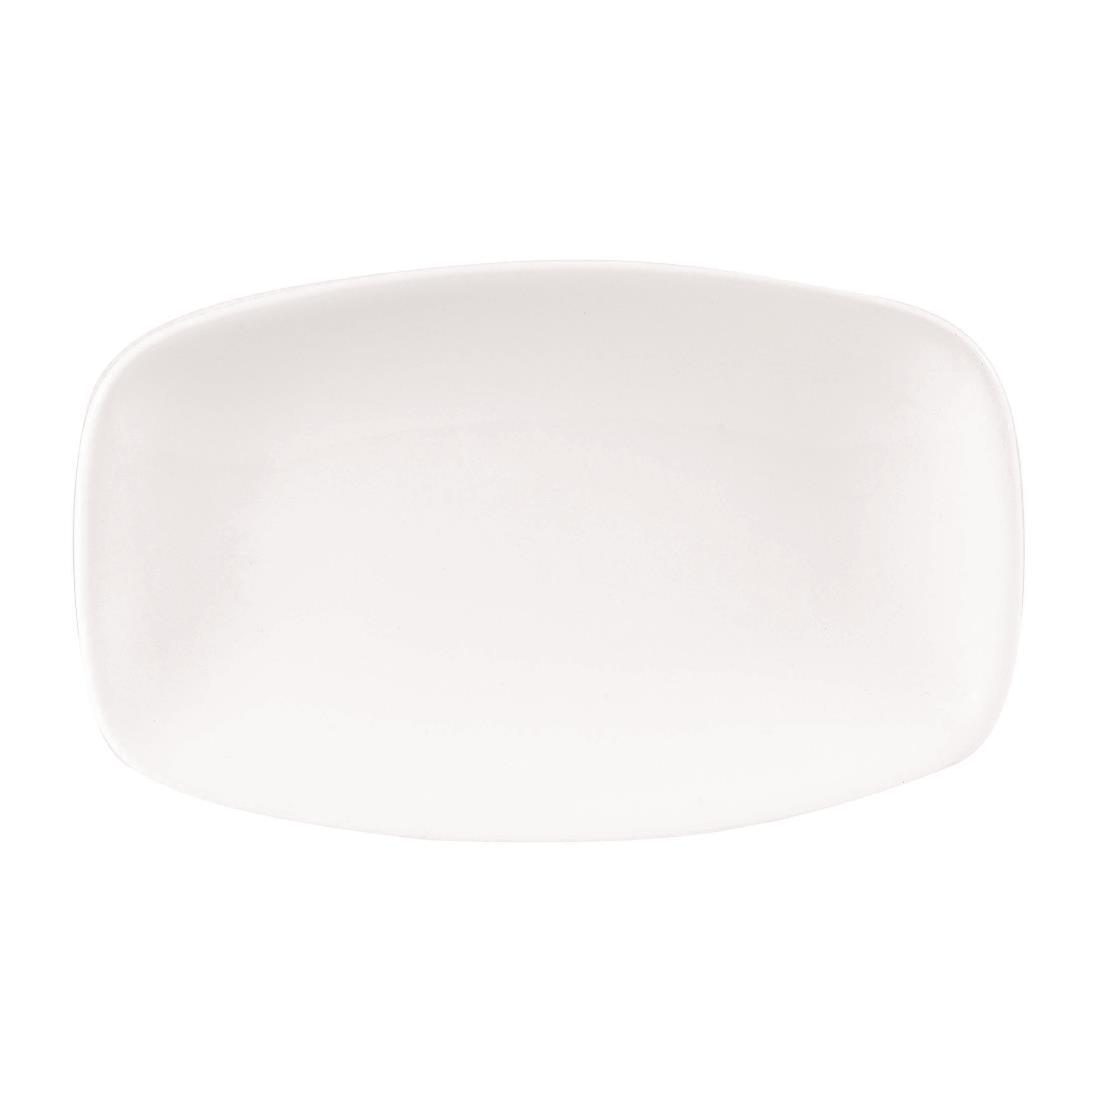 Churchill X Squared Oblong Plates White 121 x 200mm (Pack of 12) - DW345  - 2